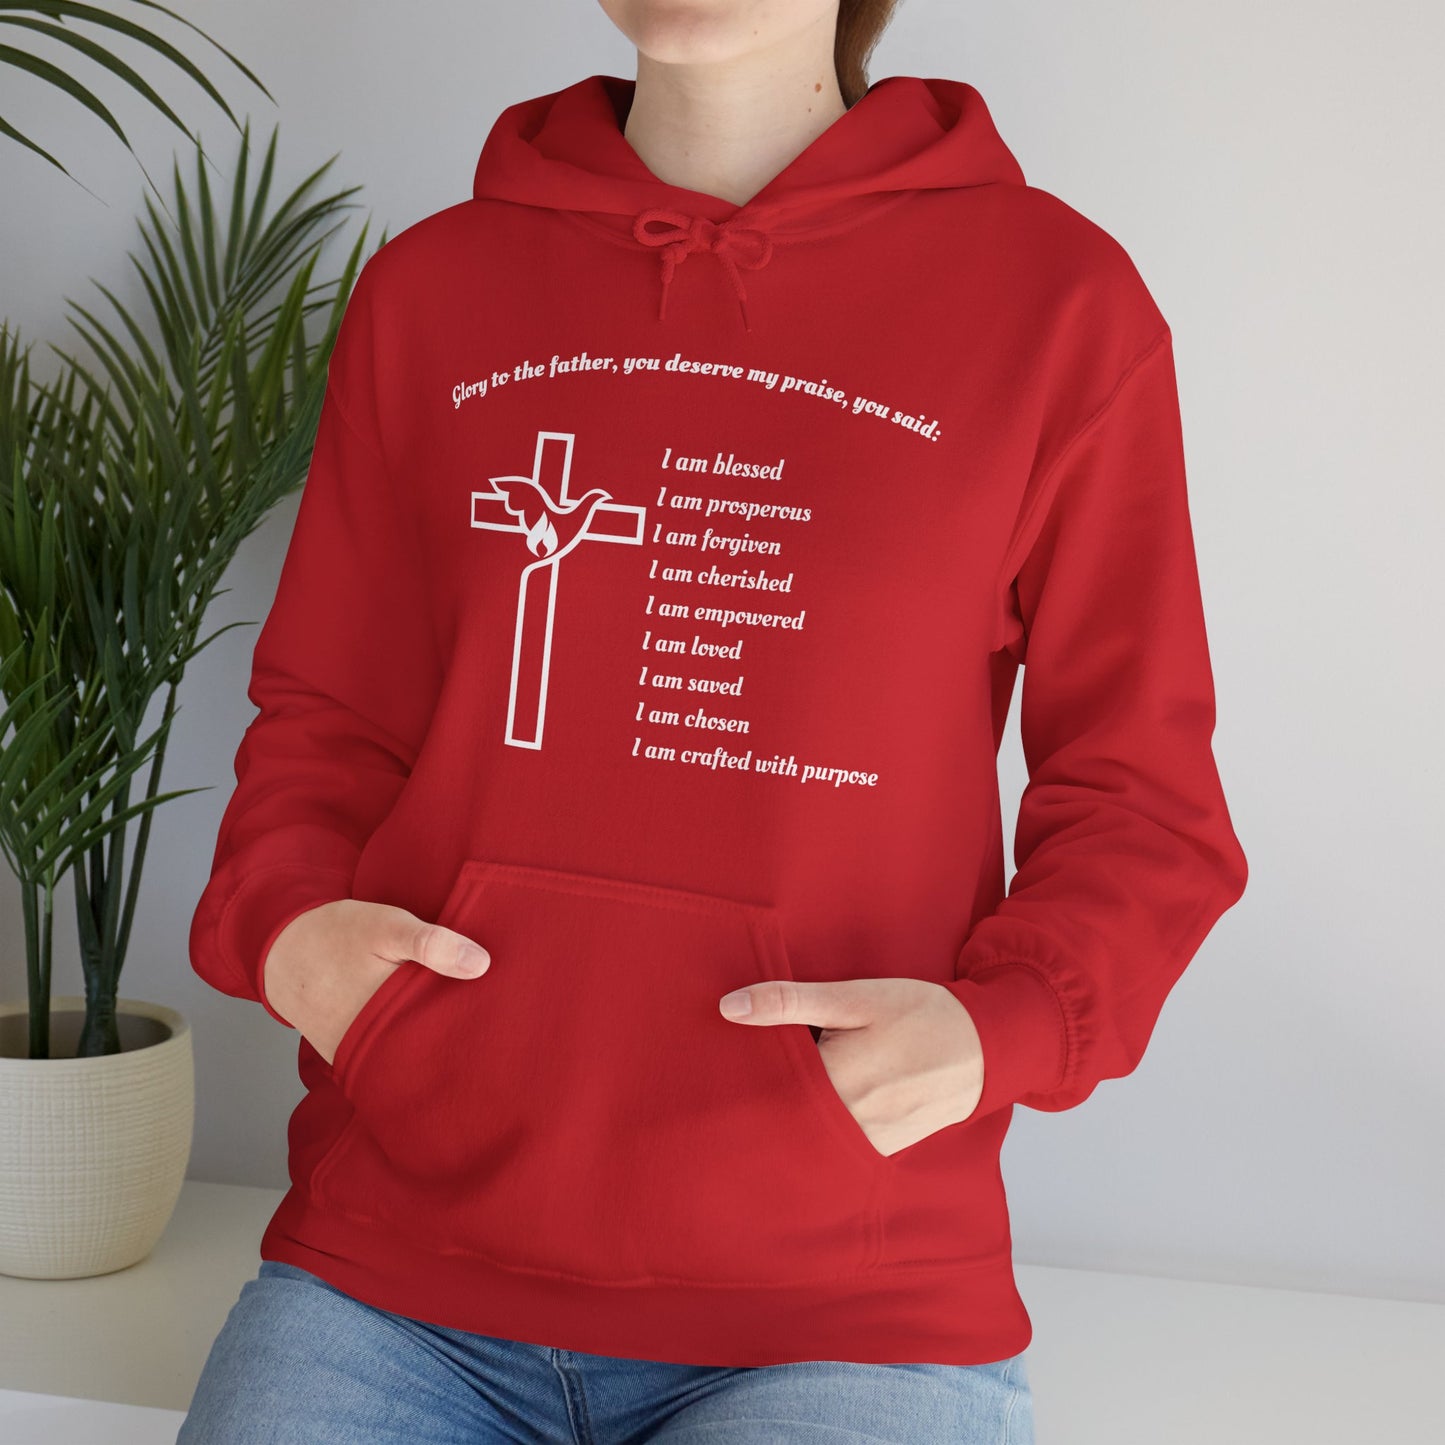 I am Glory to the Father Hooded Sweatshirt Unisex Cozy Heavy Blend1